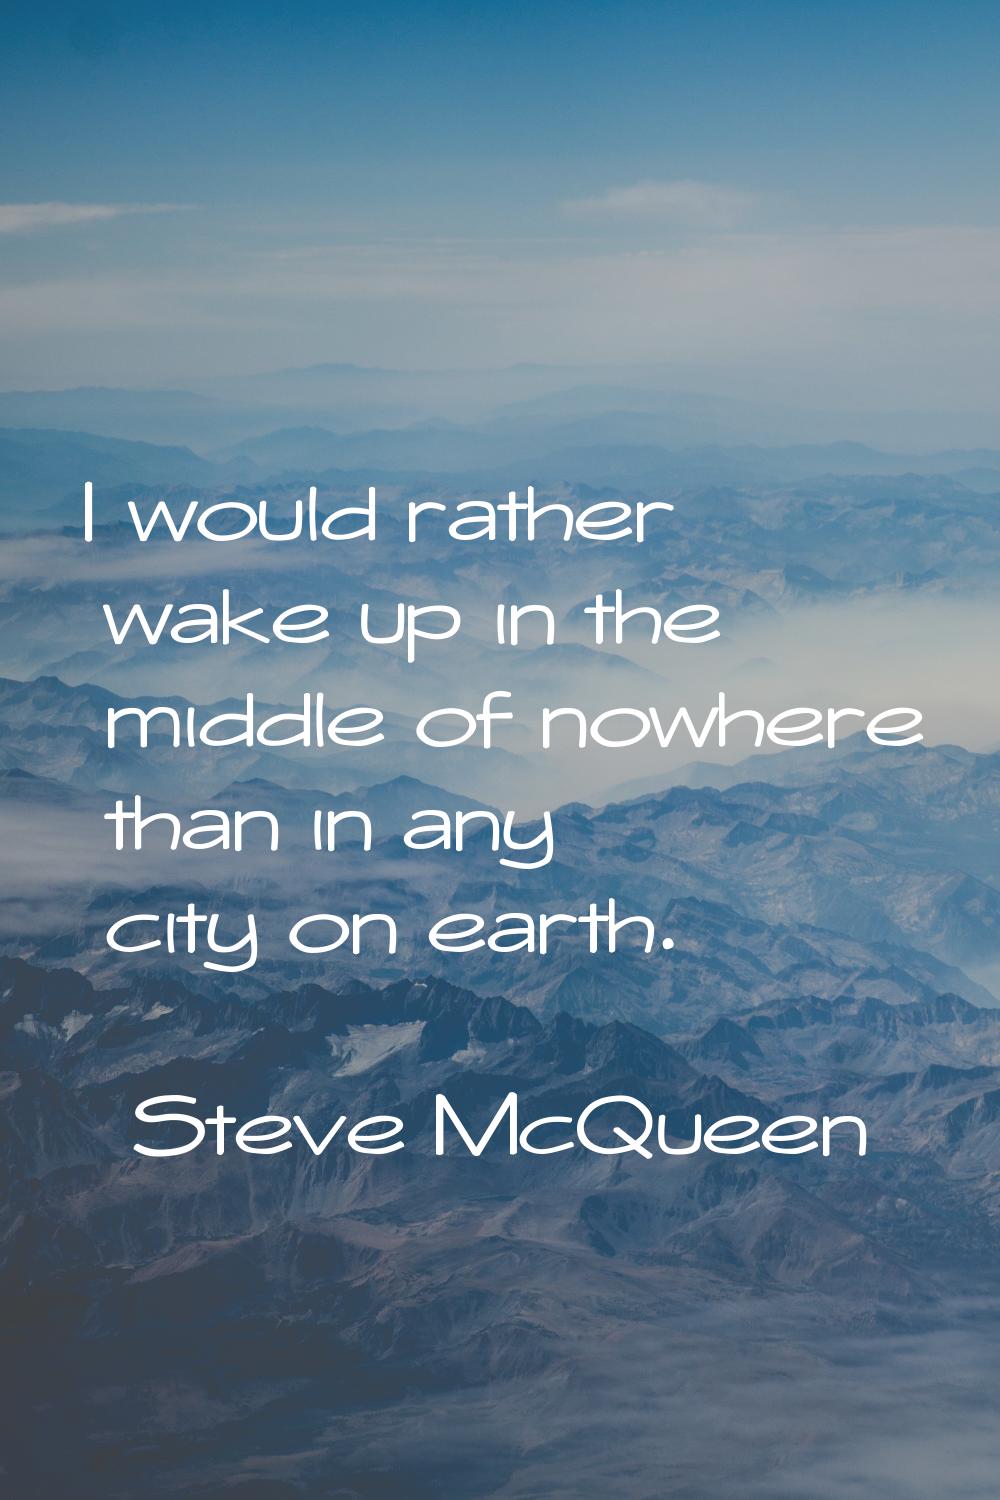 I would rather wake up in the middle of nowhere than in any city on earth.